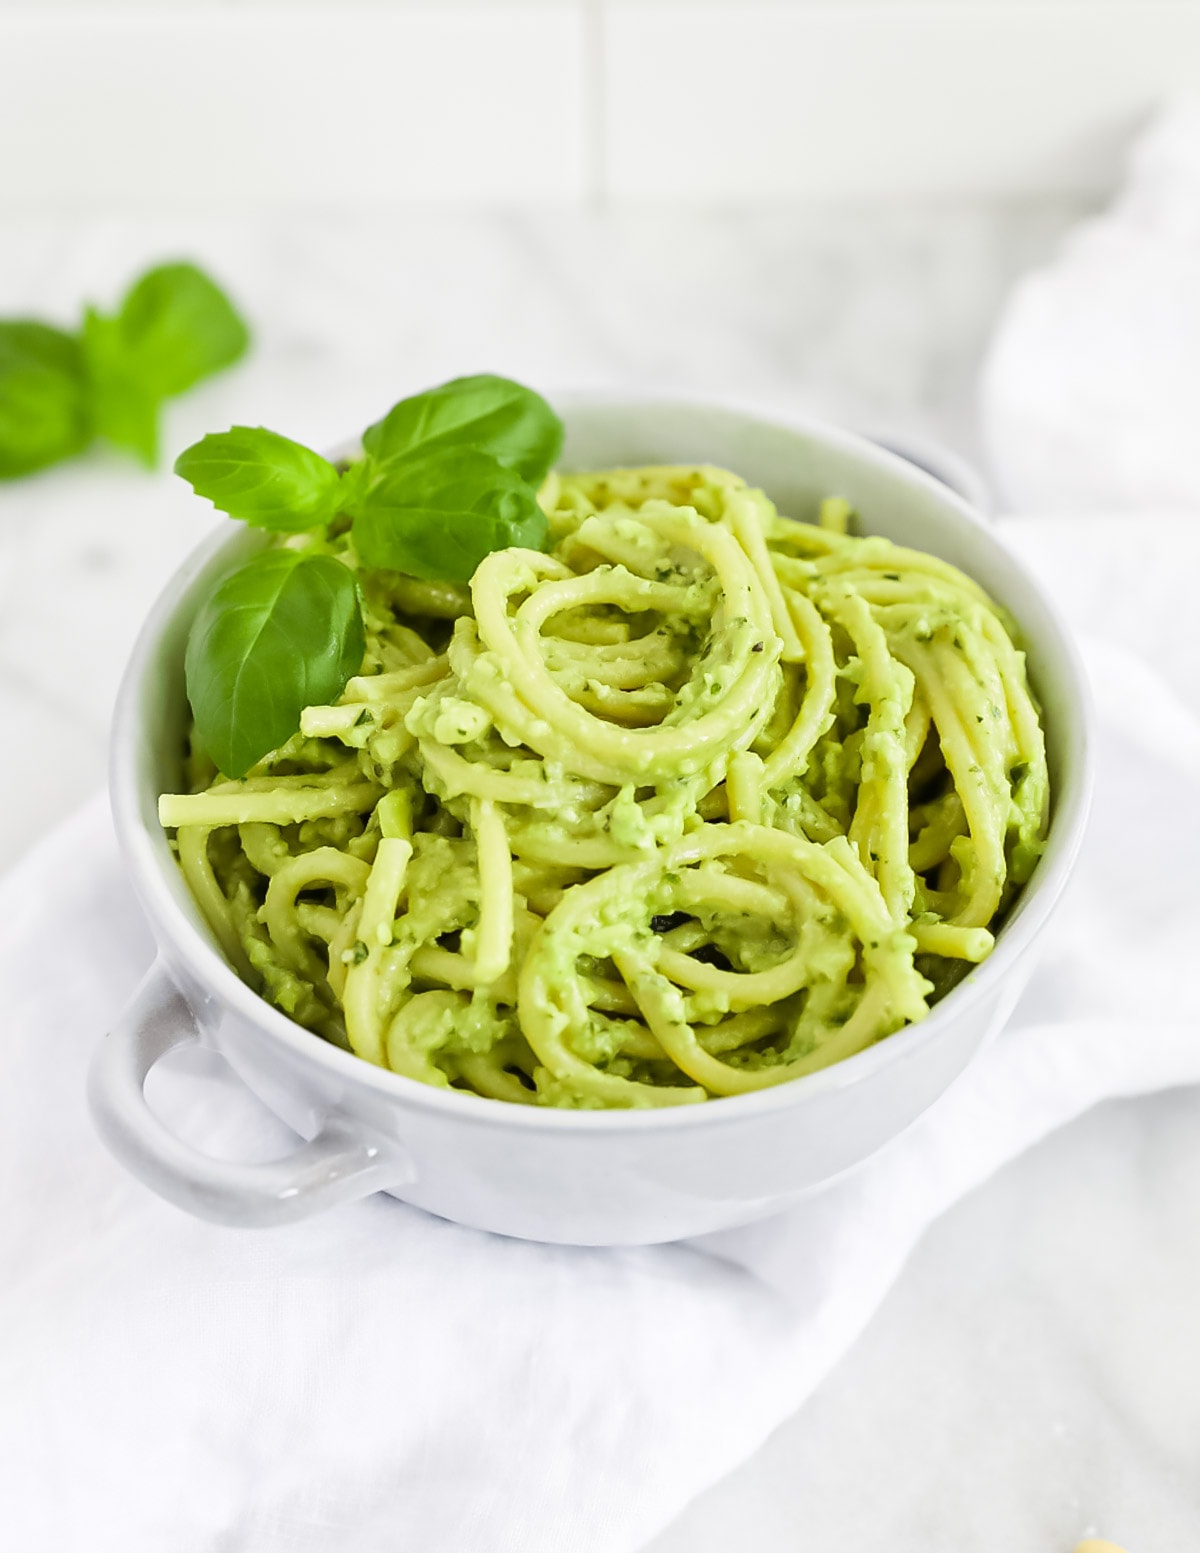 Creamy avocado pesto over thick spaghetti noodles, garnished with fresh basil leaves.